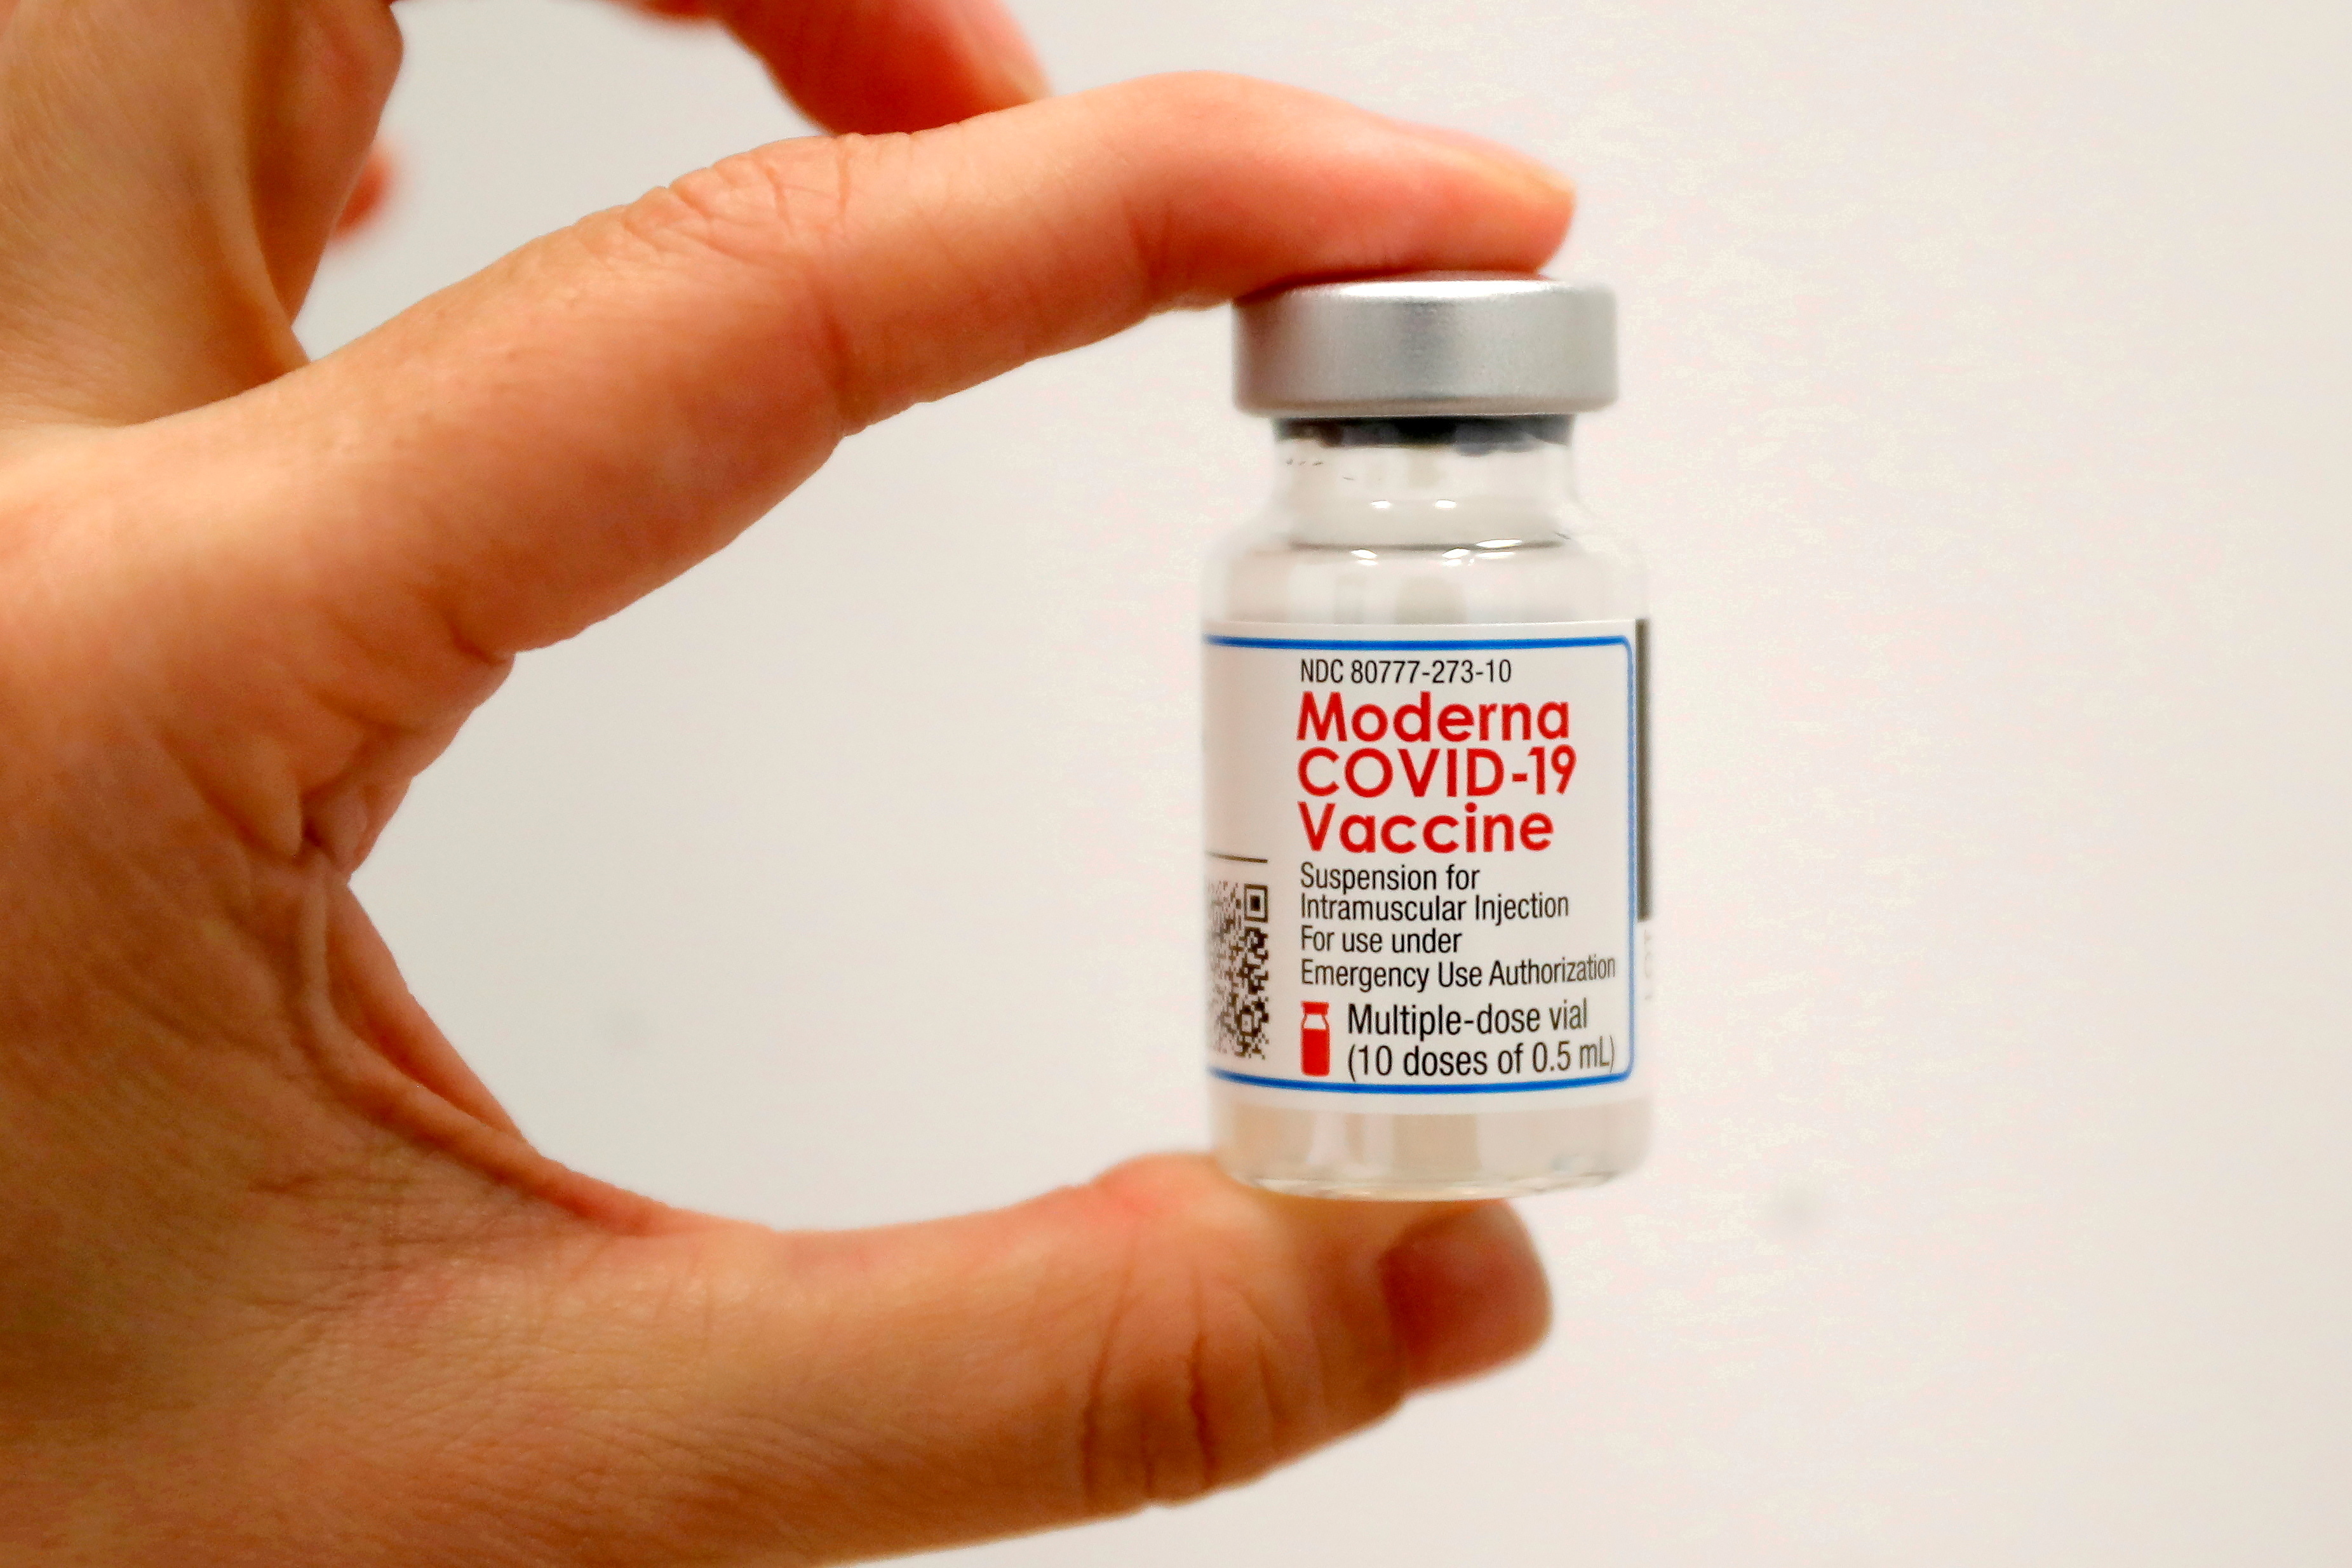         A healthcare professional holds a vial of the Moderna COVID-19 vaccine at a pop-up vaccination site run by SOMOS Community Care during the coronavirus (COVID-19) pandemic in Manhattan, New York City, New York, USA, 29 January, 2021. REUTERS / Mike Segar / File Photo